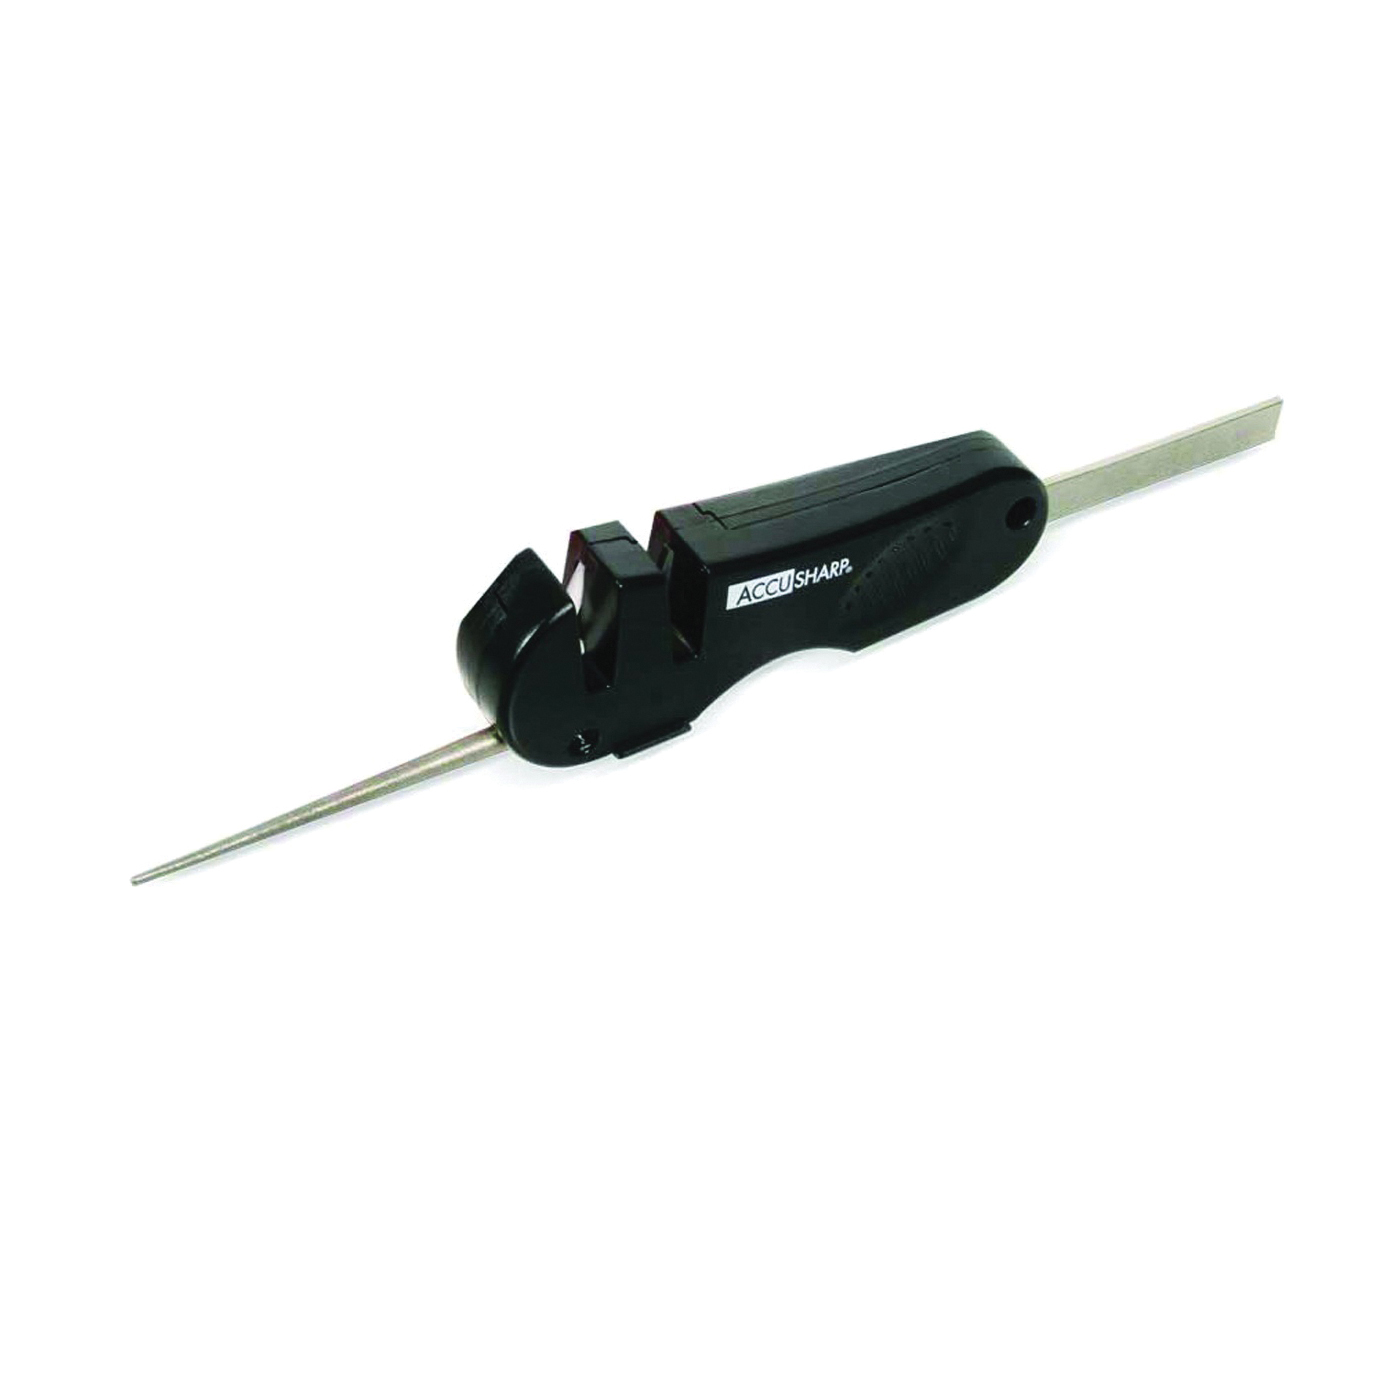 029C Knife and Tool Sharpener, Tungsten Carbide Abrasive